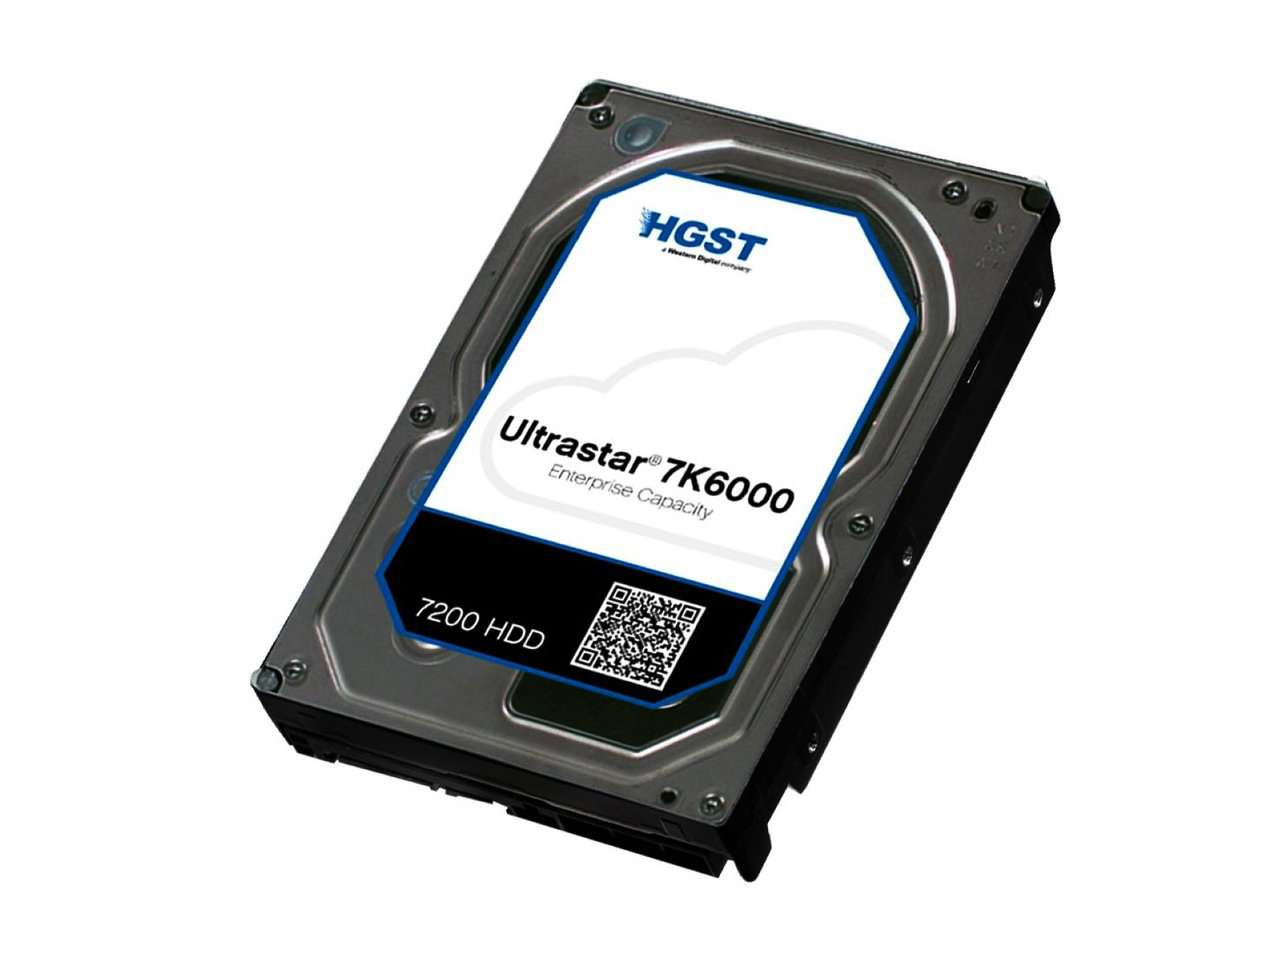 HGST Ultrastar 7K6000 0F22823  HUS726050AL5215 5TB 7.2K RPM SAS 12Gb/s 512e 128MB Cache 3.5" TCG FIPS Manufacturer Recertified HDD